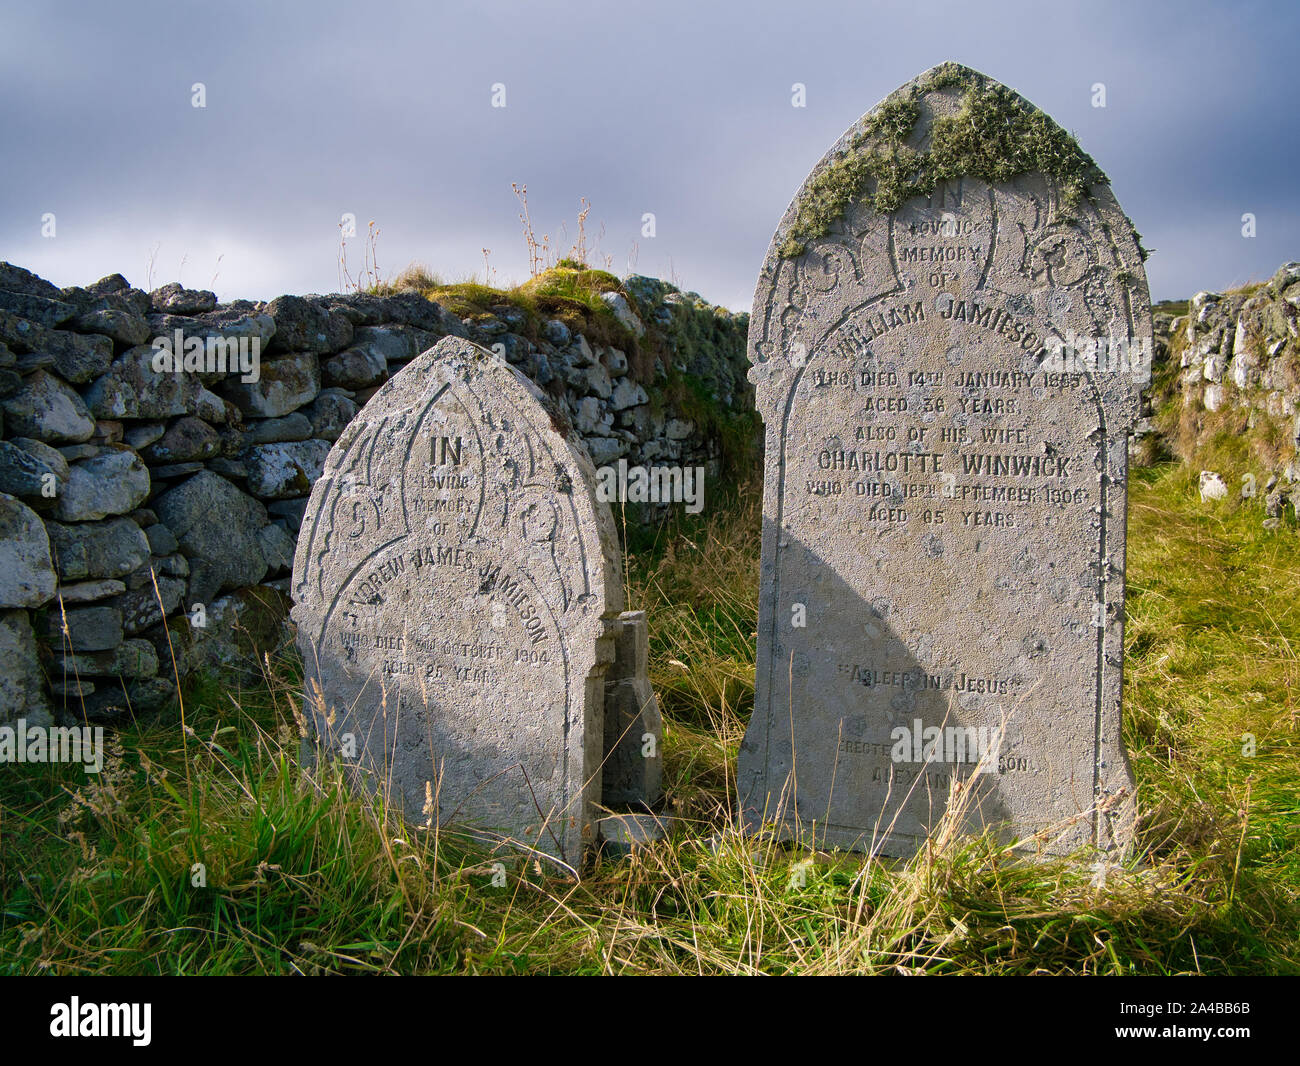 Old graves of the Jamieson family in a remote graveyard near Sandwick on the island of Unst in Shetland, Scotland, UK Stock Photo